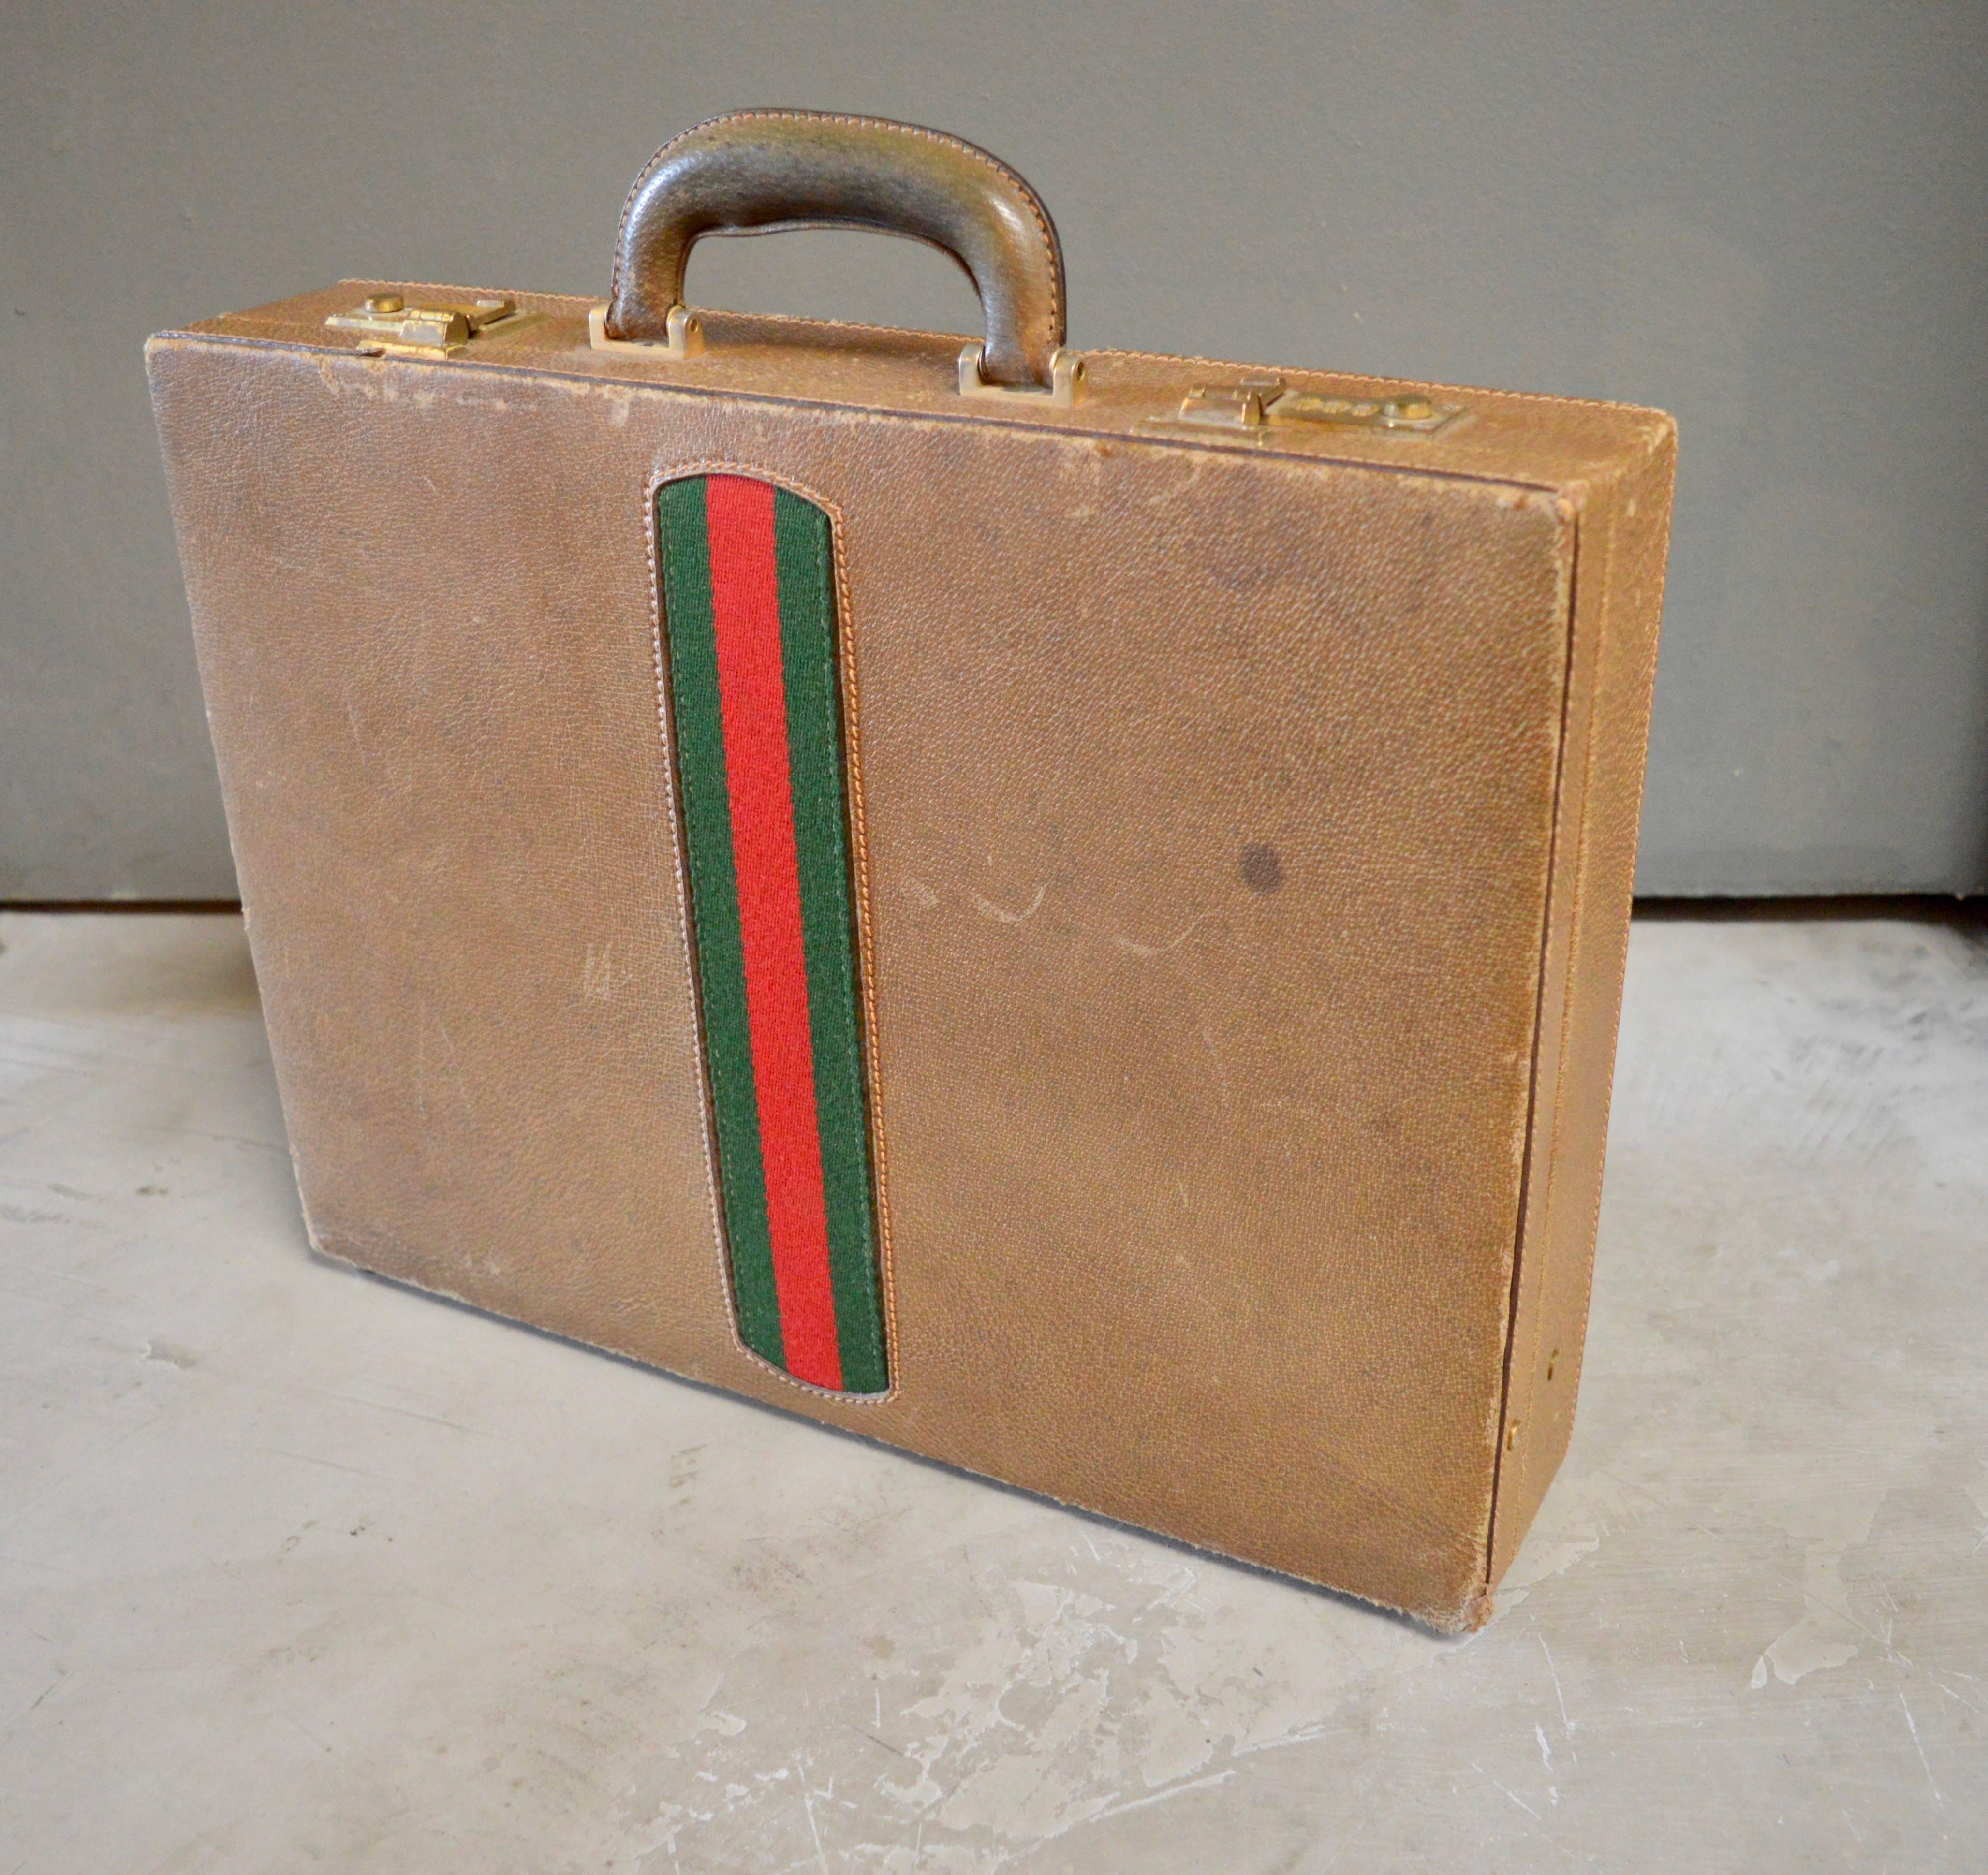 Excellent leather Gucci briefcase with signature Gucci stripes on both sides. Great coloring and patina to leather. Brass closures. Roomy inside with leather sleeves for holding papers. Brass clasps on both sides of leather sleeves allowing to allow